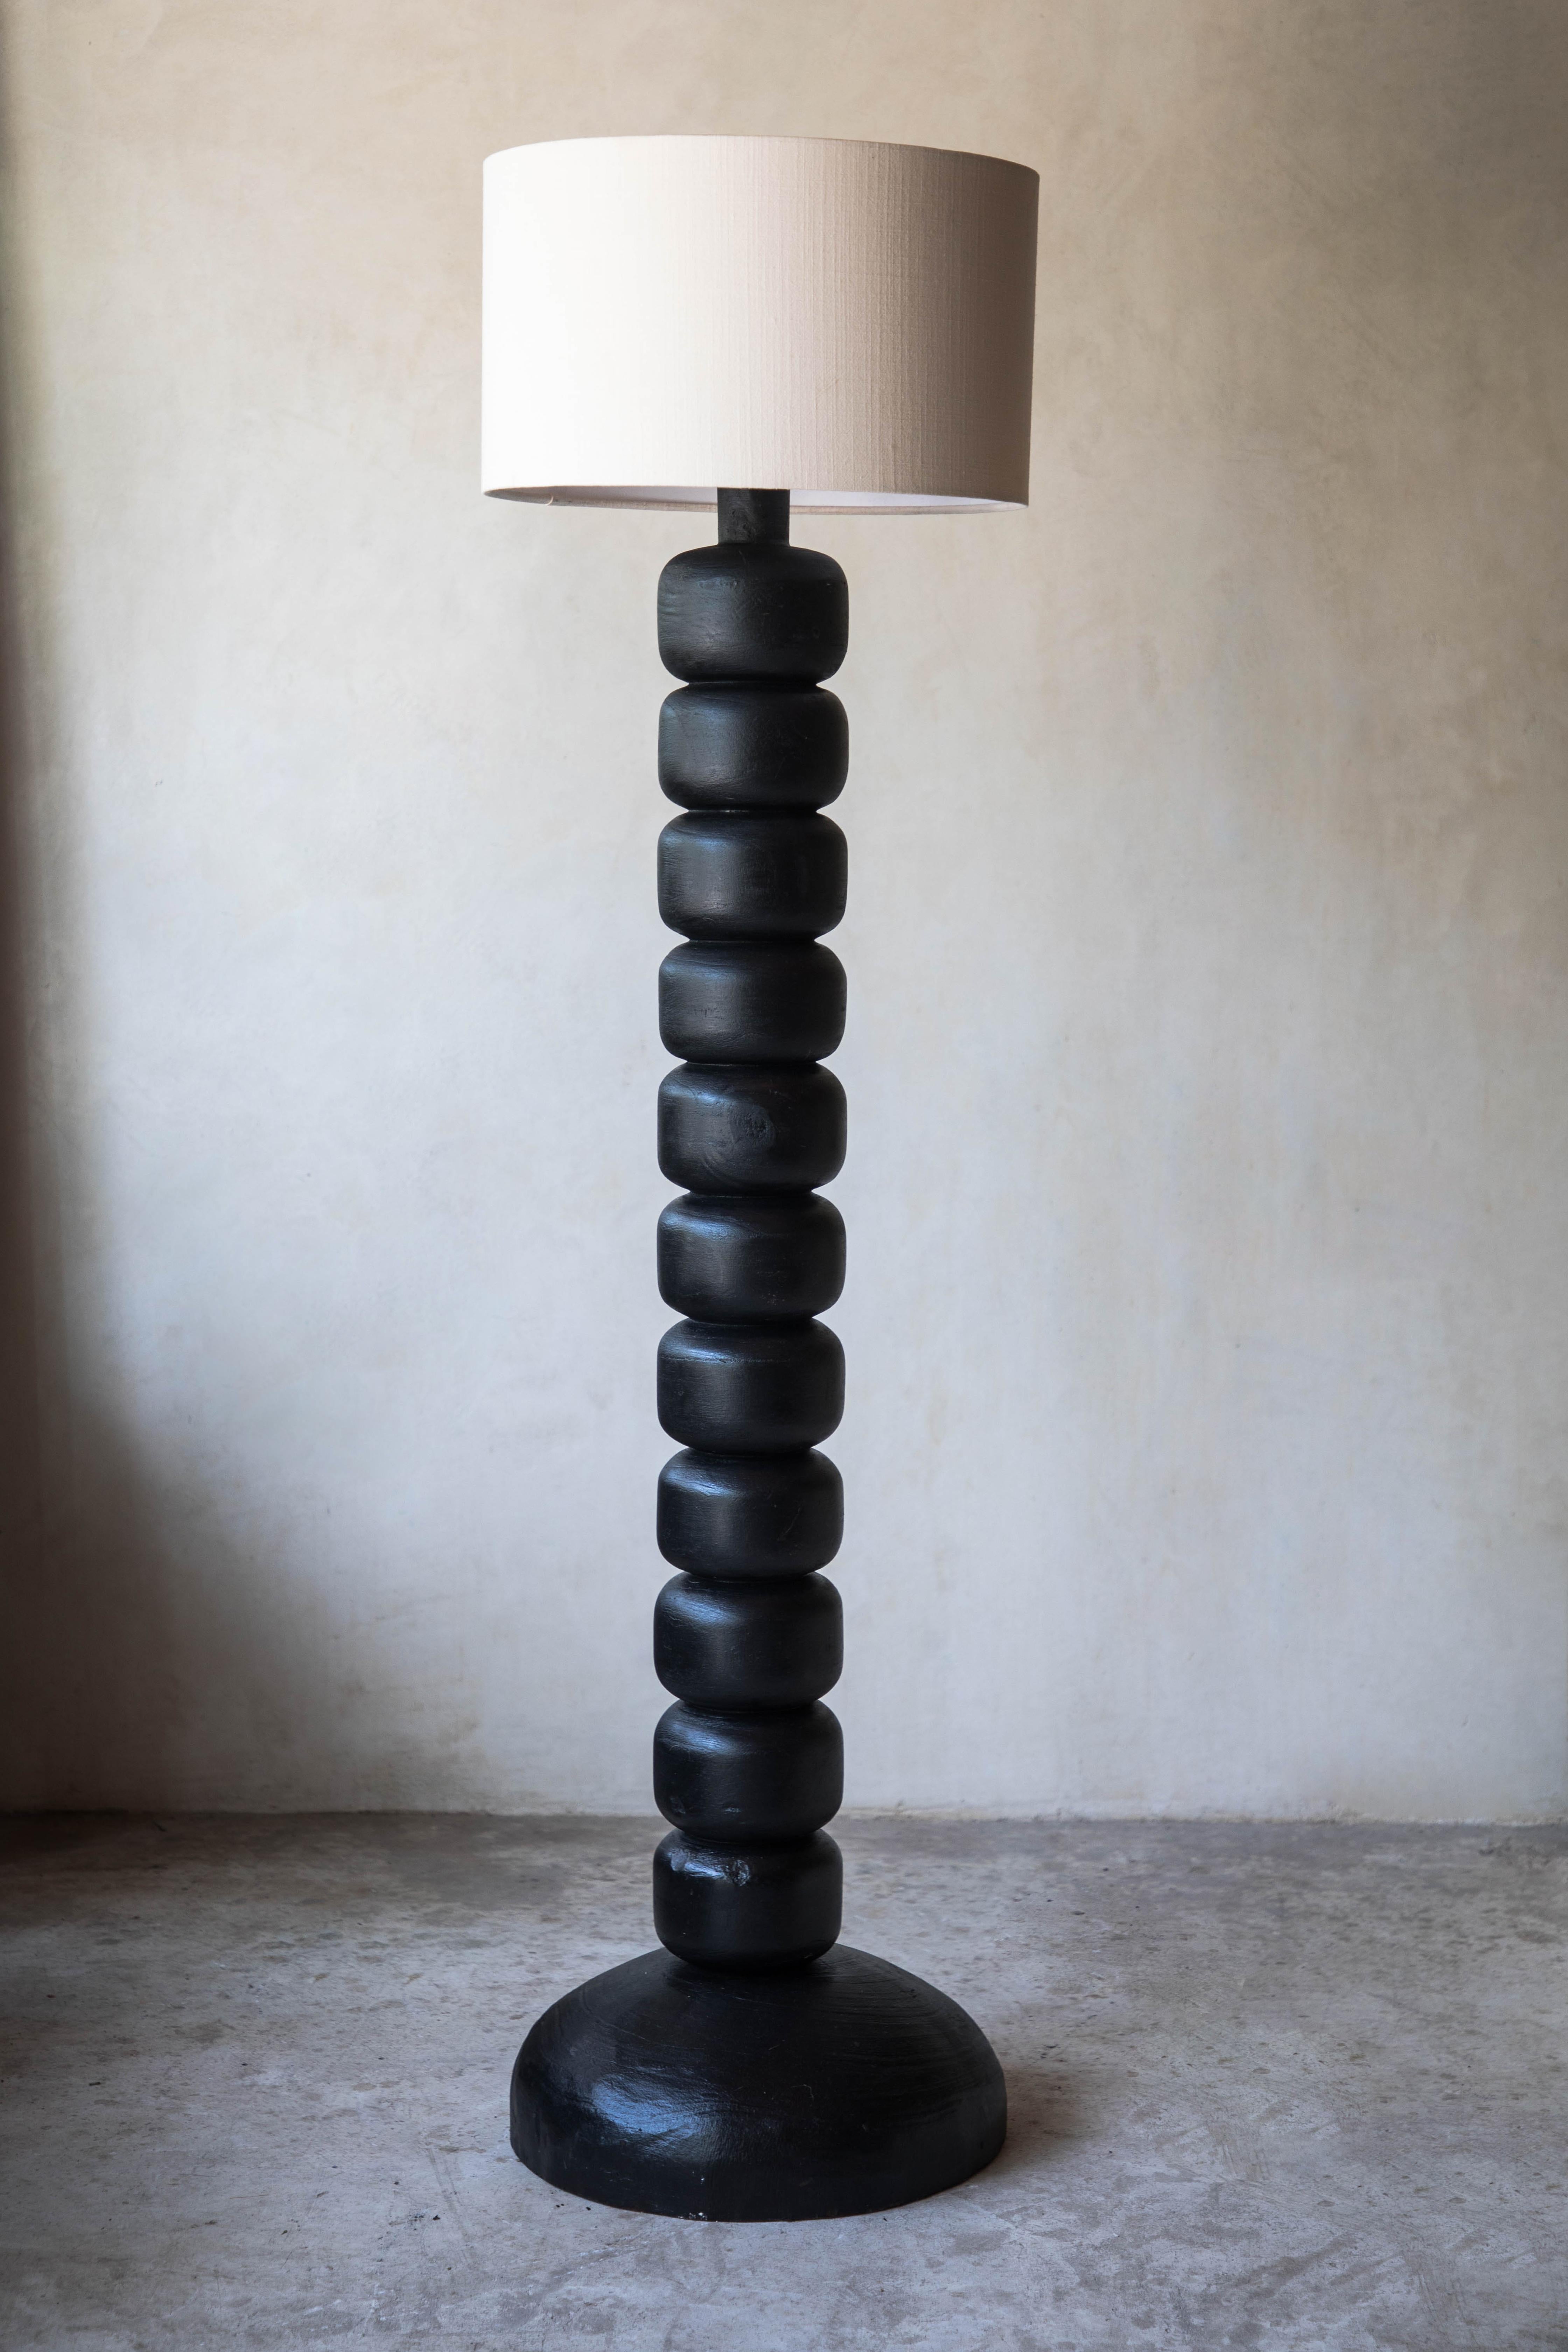 Black jabin wood floor lamp with linen screen by Daniel Orozco
Material: Jabin wood, linen.
Dimensions: D 39.9 x H 159.8 cm
Available in palm or linen lampshade and in natural or black wood finish.
Available in 2 sizes: D30 x H110, D40 x H160